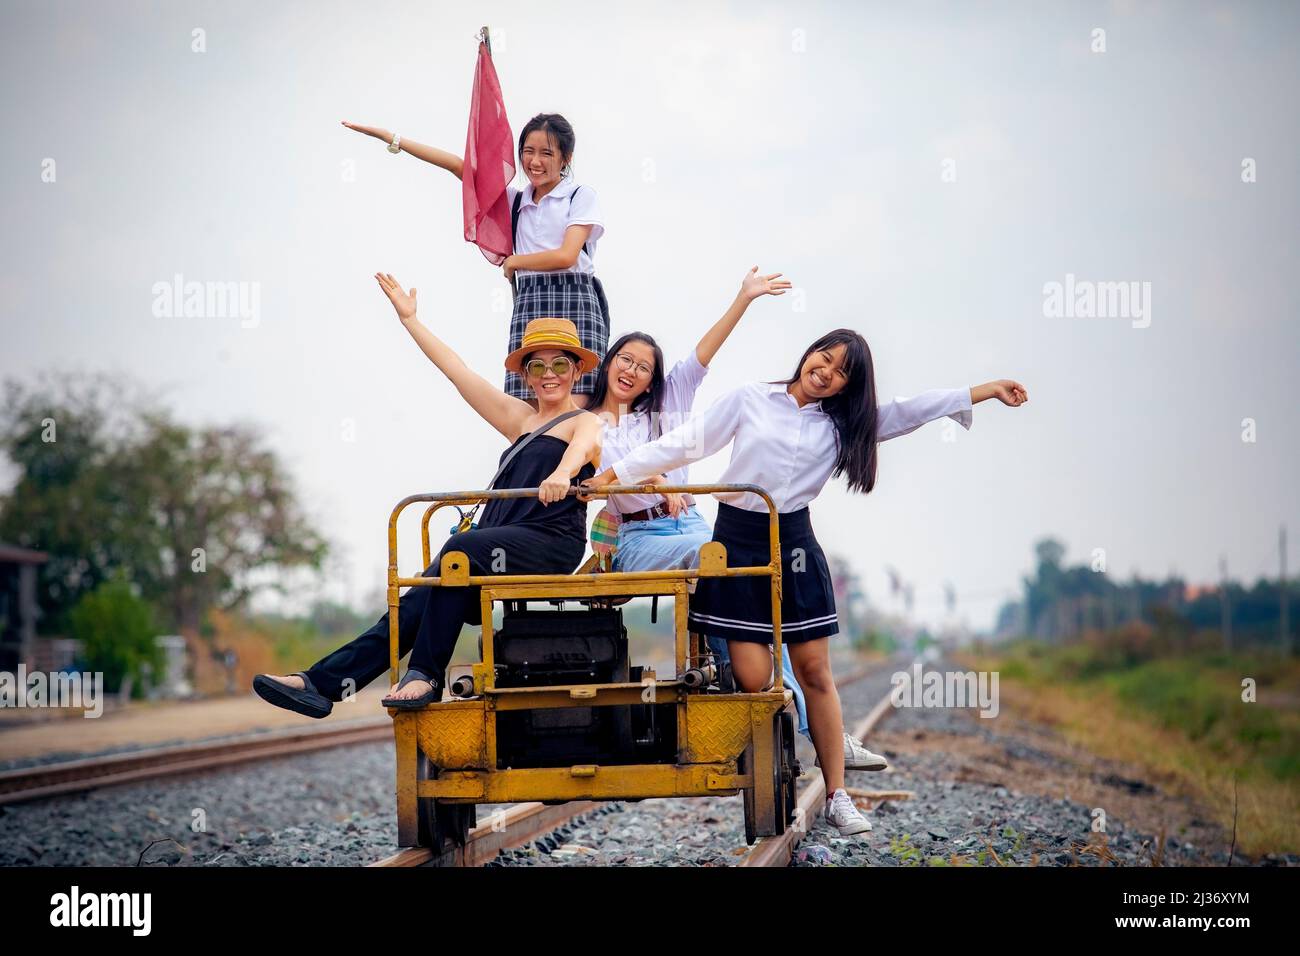 group of different asian woman happiness lifestyle on railway track Stock Photo